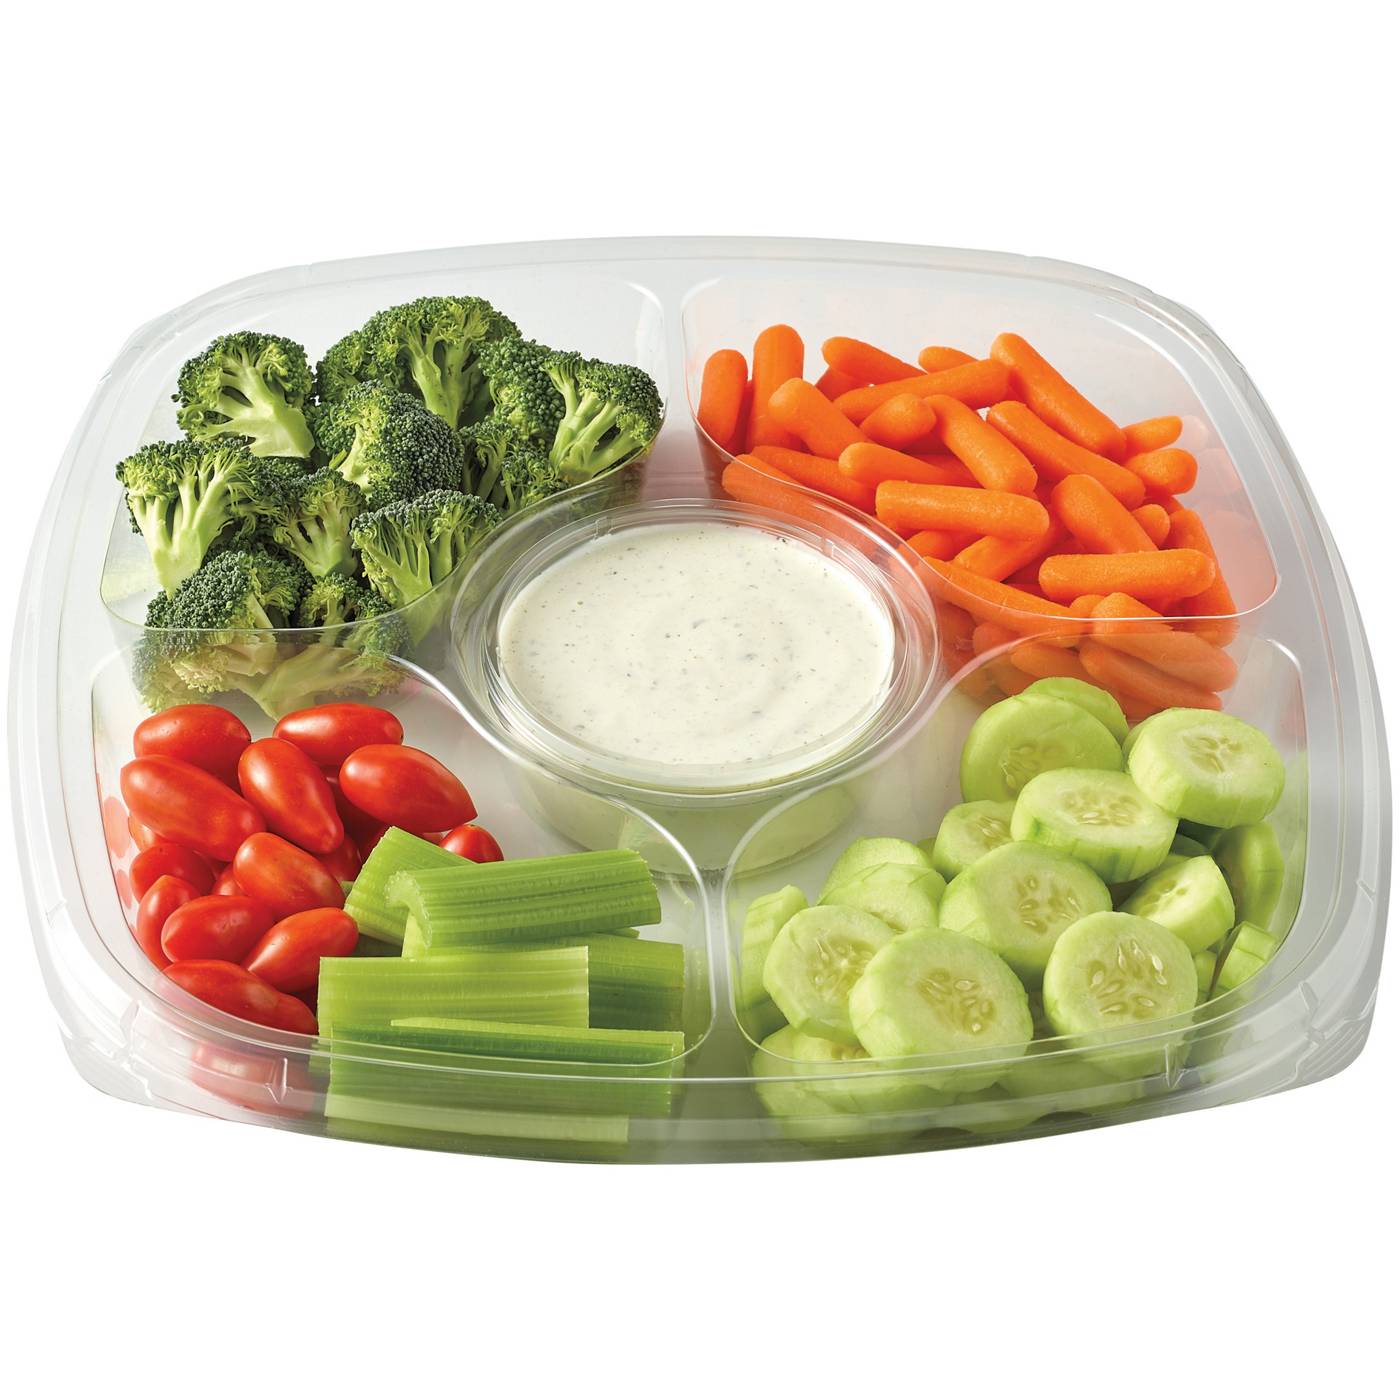 H-E-B Large Fresh Veggie Party Tray - Ranch Dip; image 2 of 2